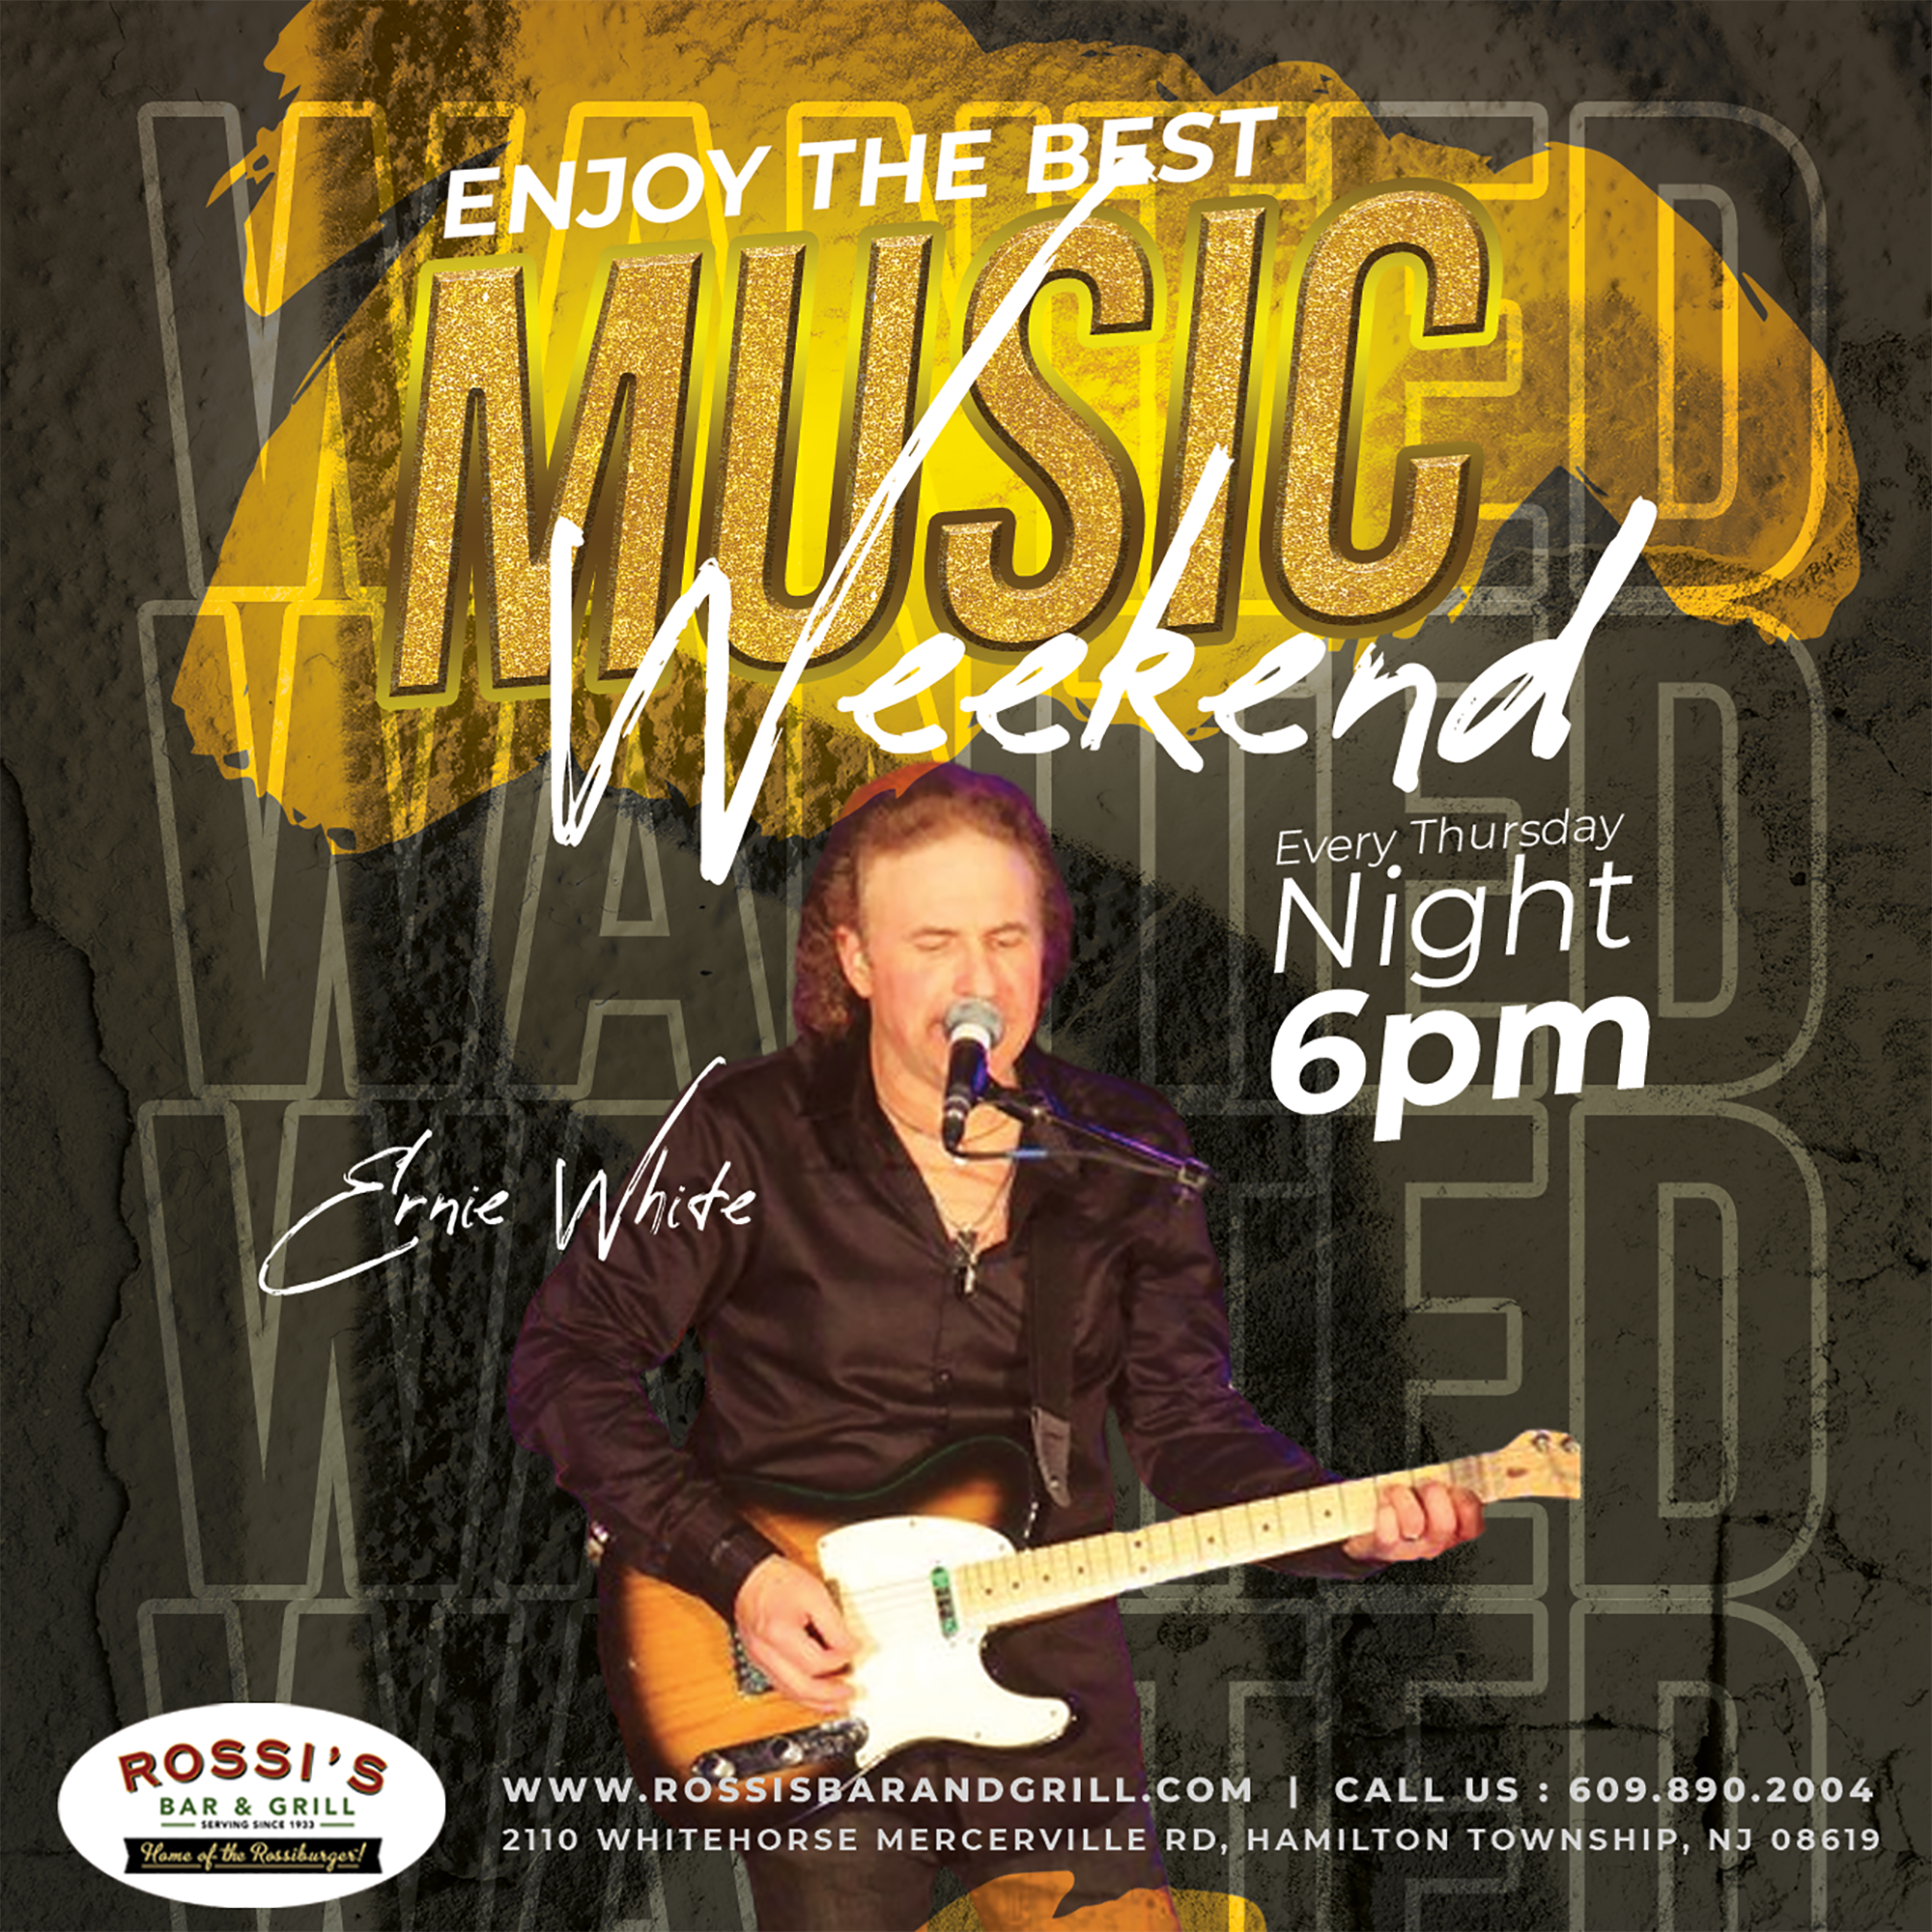 Ernie White at Rossi bar and grill nj